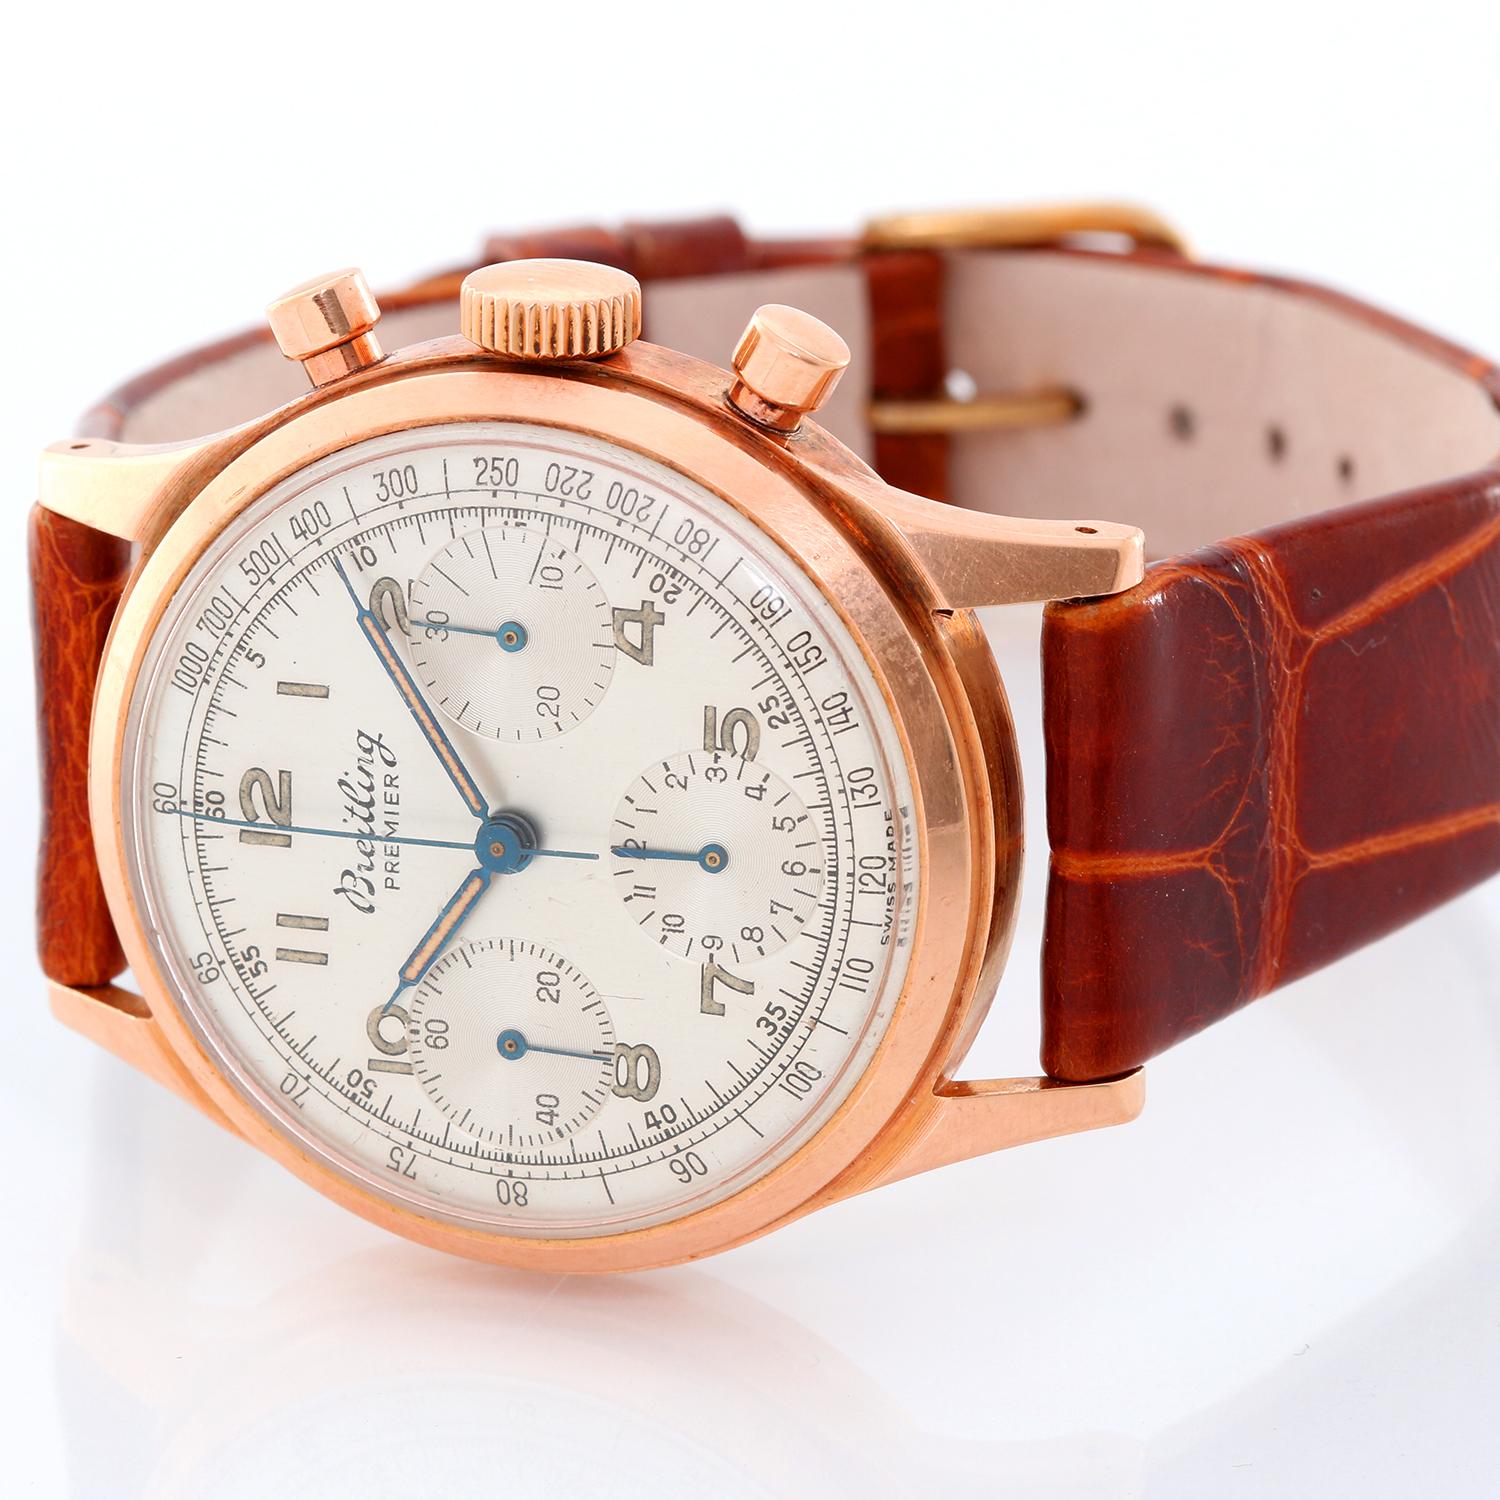 Vintage Breitling Premier 18K Rose Gold 788 Men's Watch - Manual winding. 18K Rose Gold ( 36 mm ); unpolished. Screw back case with round pushers; . Flawless original ilver dial with silver subdials; tachymeter scale. Brown leather strap with tang